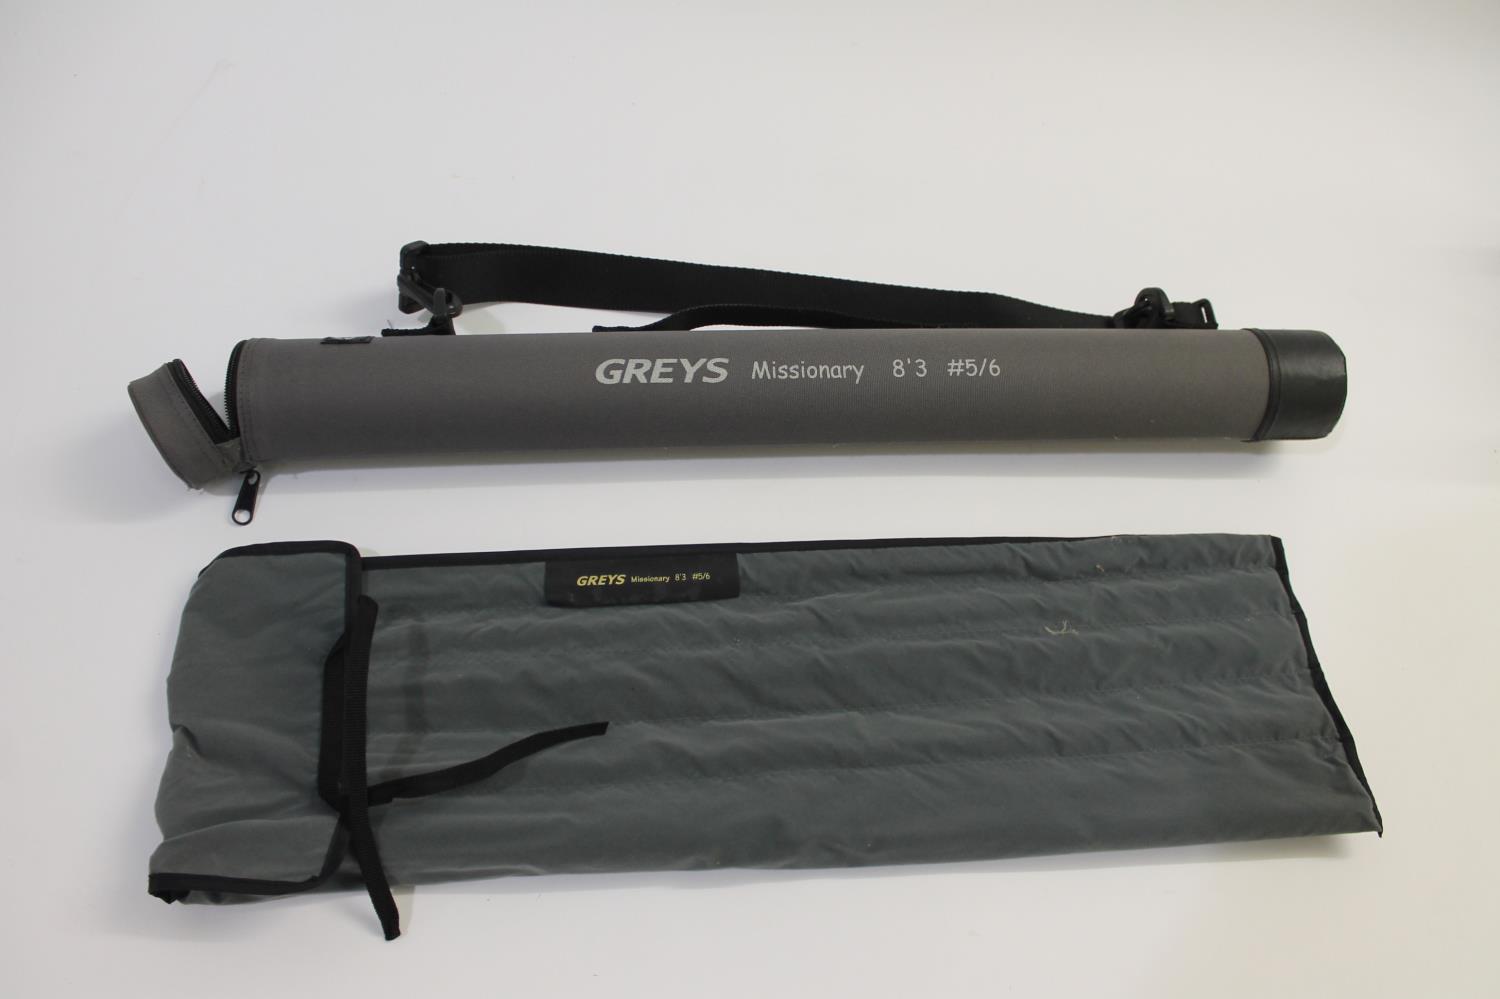 GREY'S MISSIONARY - CARBON FIBRE TRAVEL FISHING ROD. - Image 11 of 11